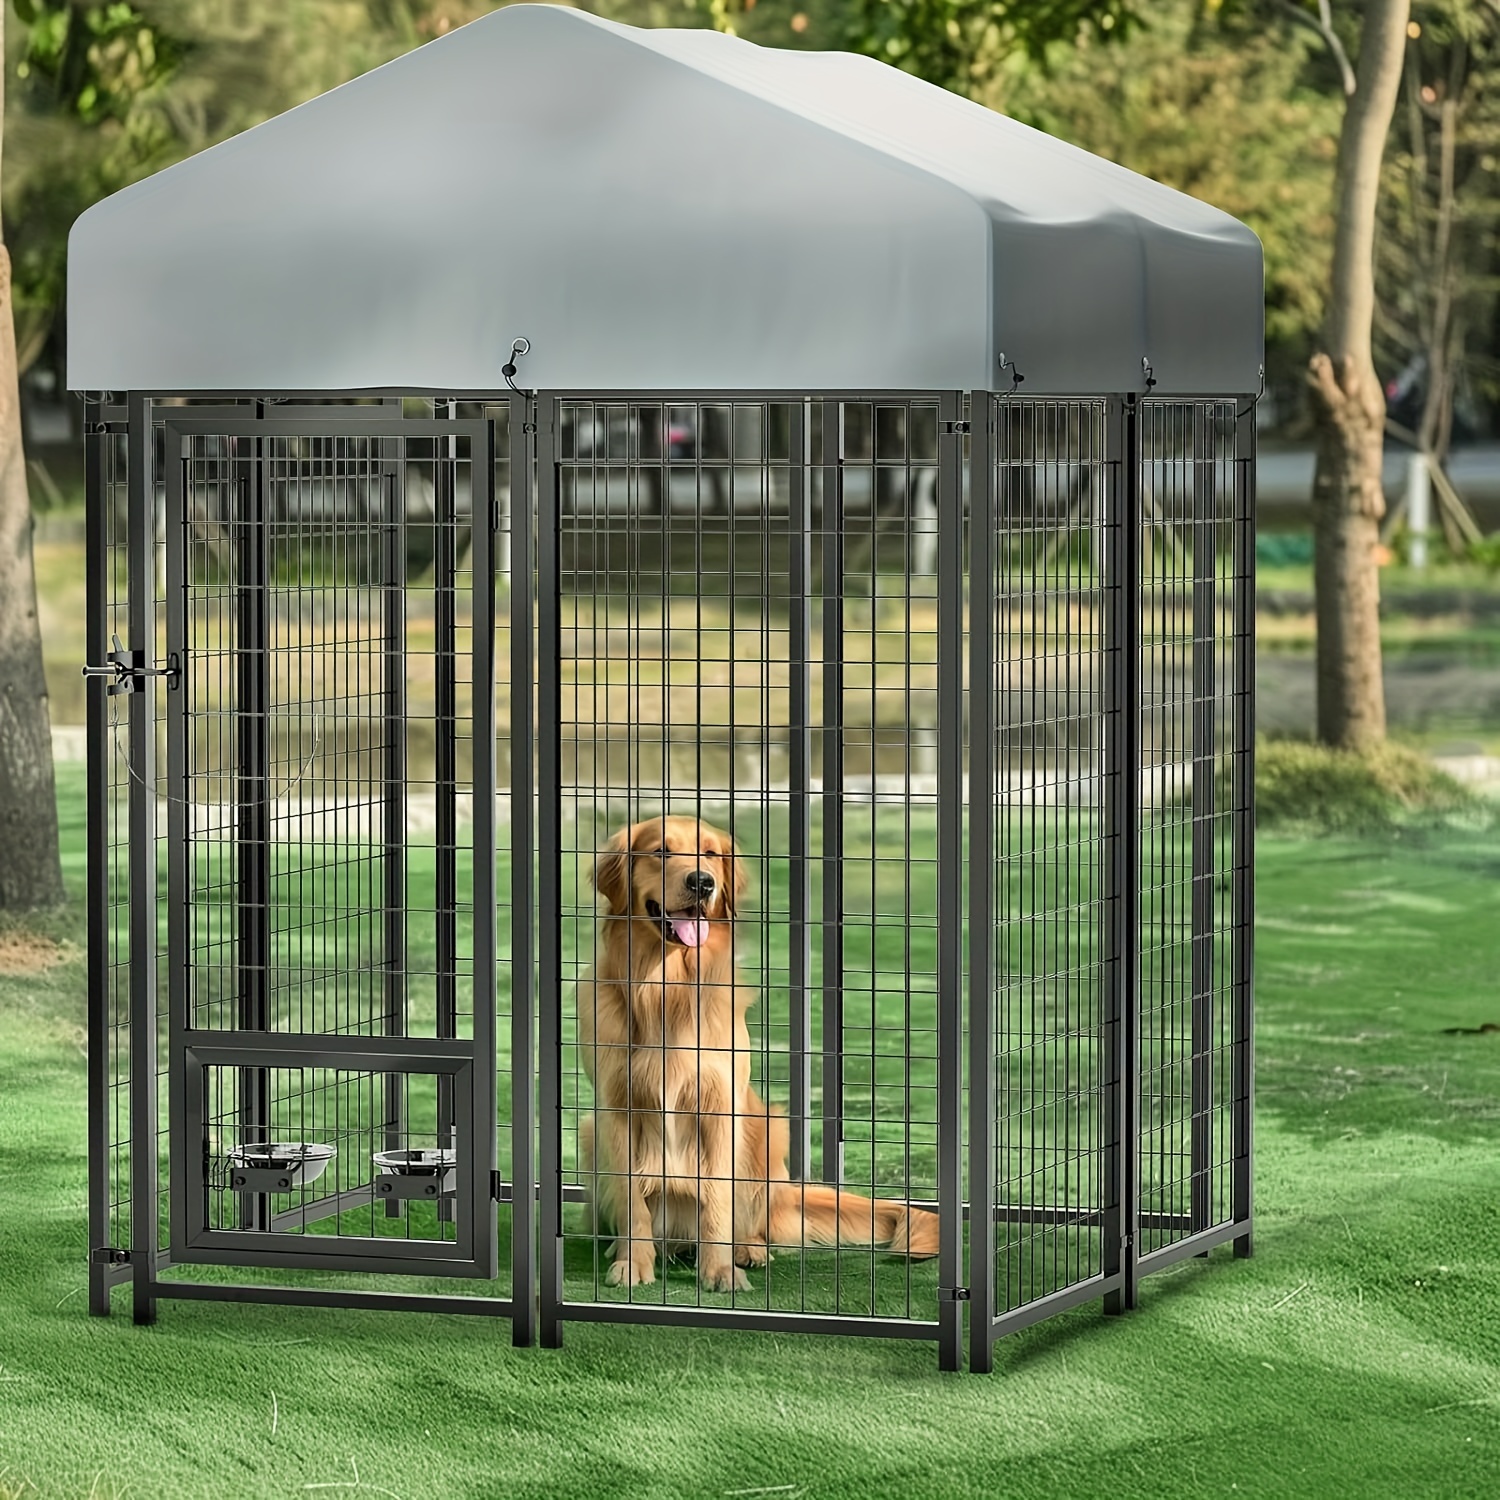 

4x4x6ft Large Outdoor Dog Kennel With Rotating Dog Bowl, Heavy Duty Welded Wire Dog Run, Dog Playpen Fence With Uv-resistant Waterproof Roof, Dog Enclosure For Outside